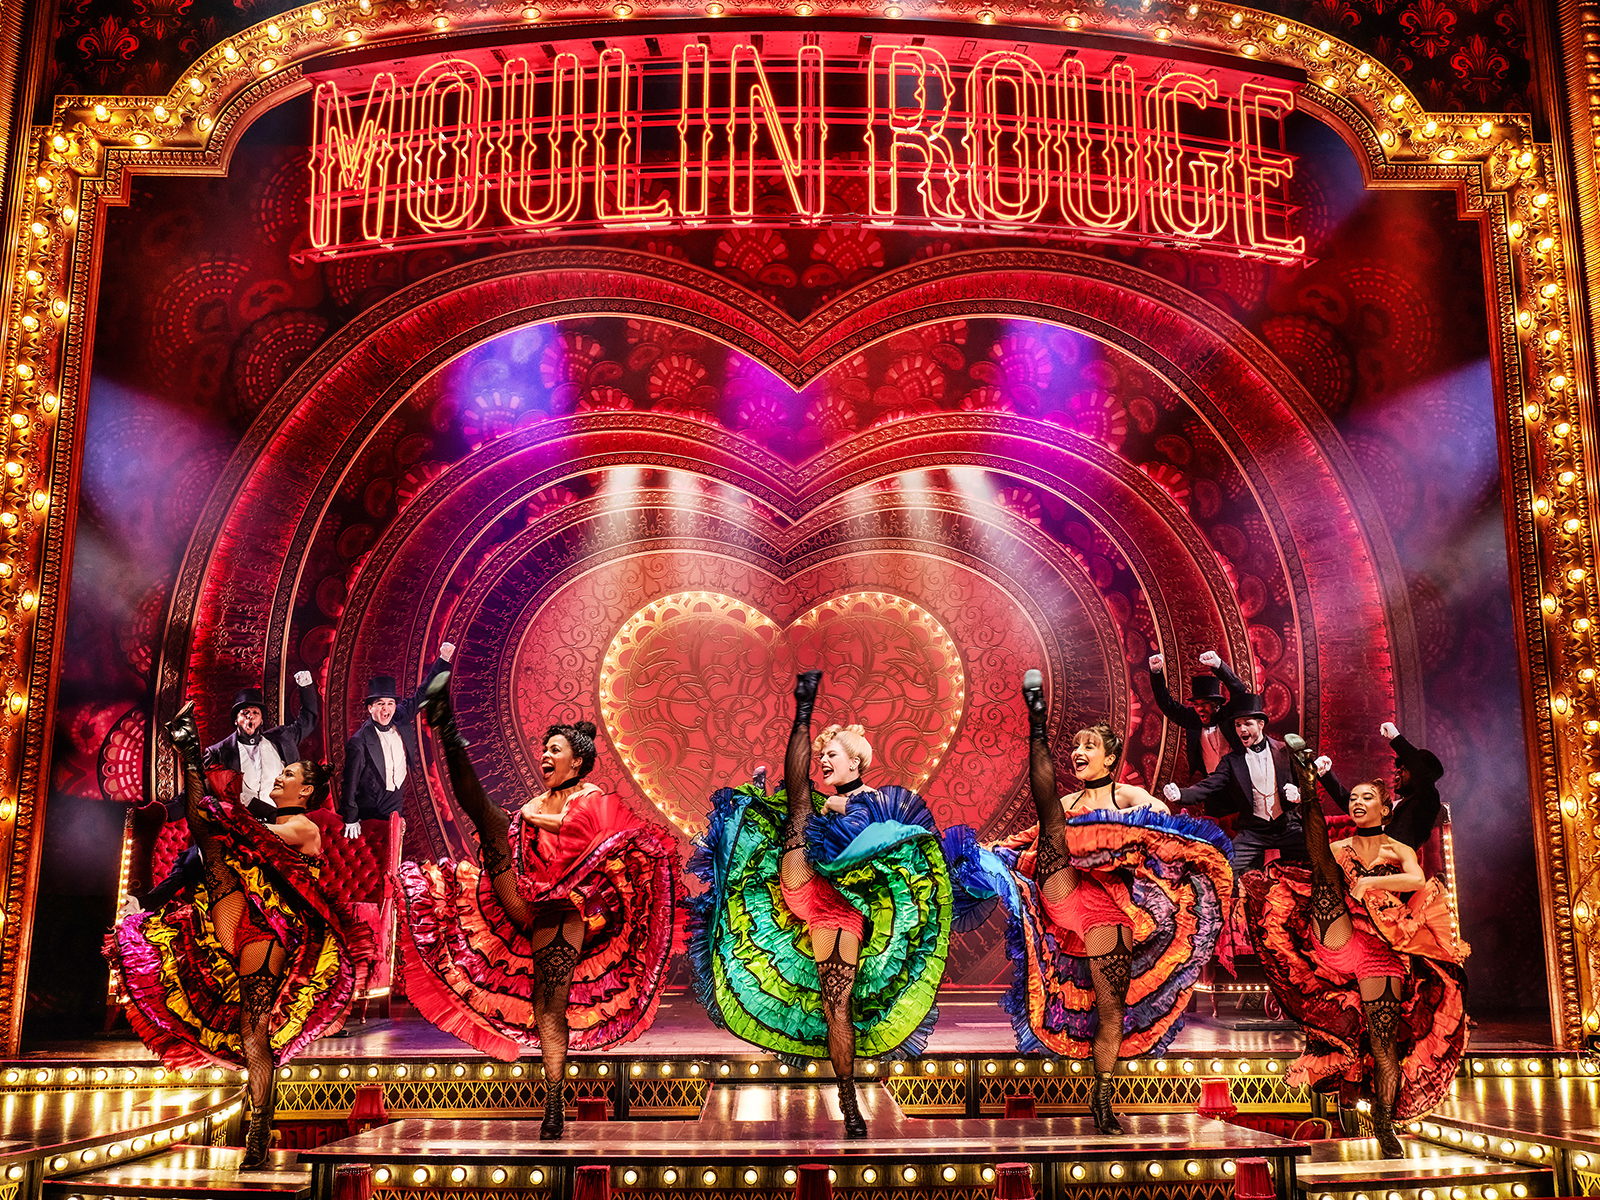 Moulin Rouge! The Musical photo from the show